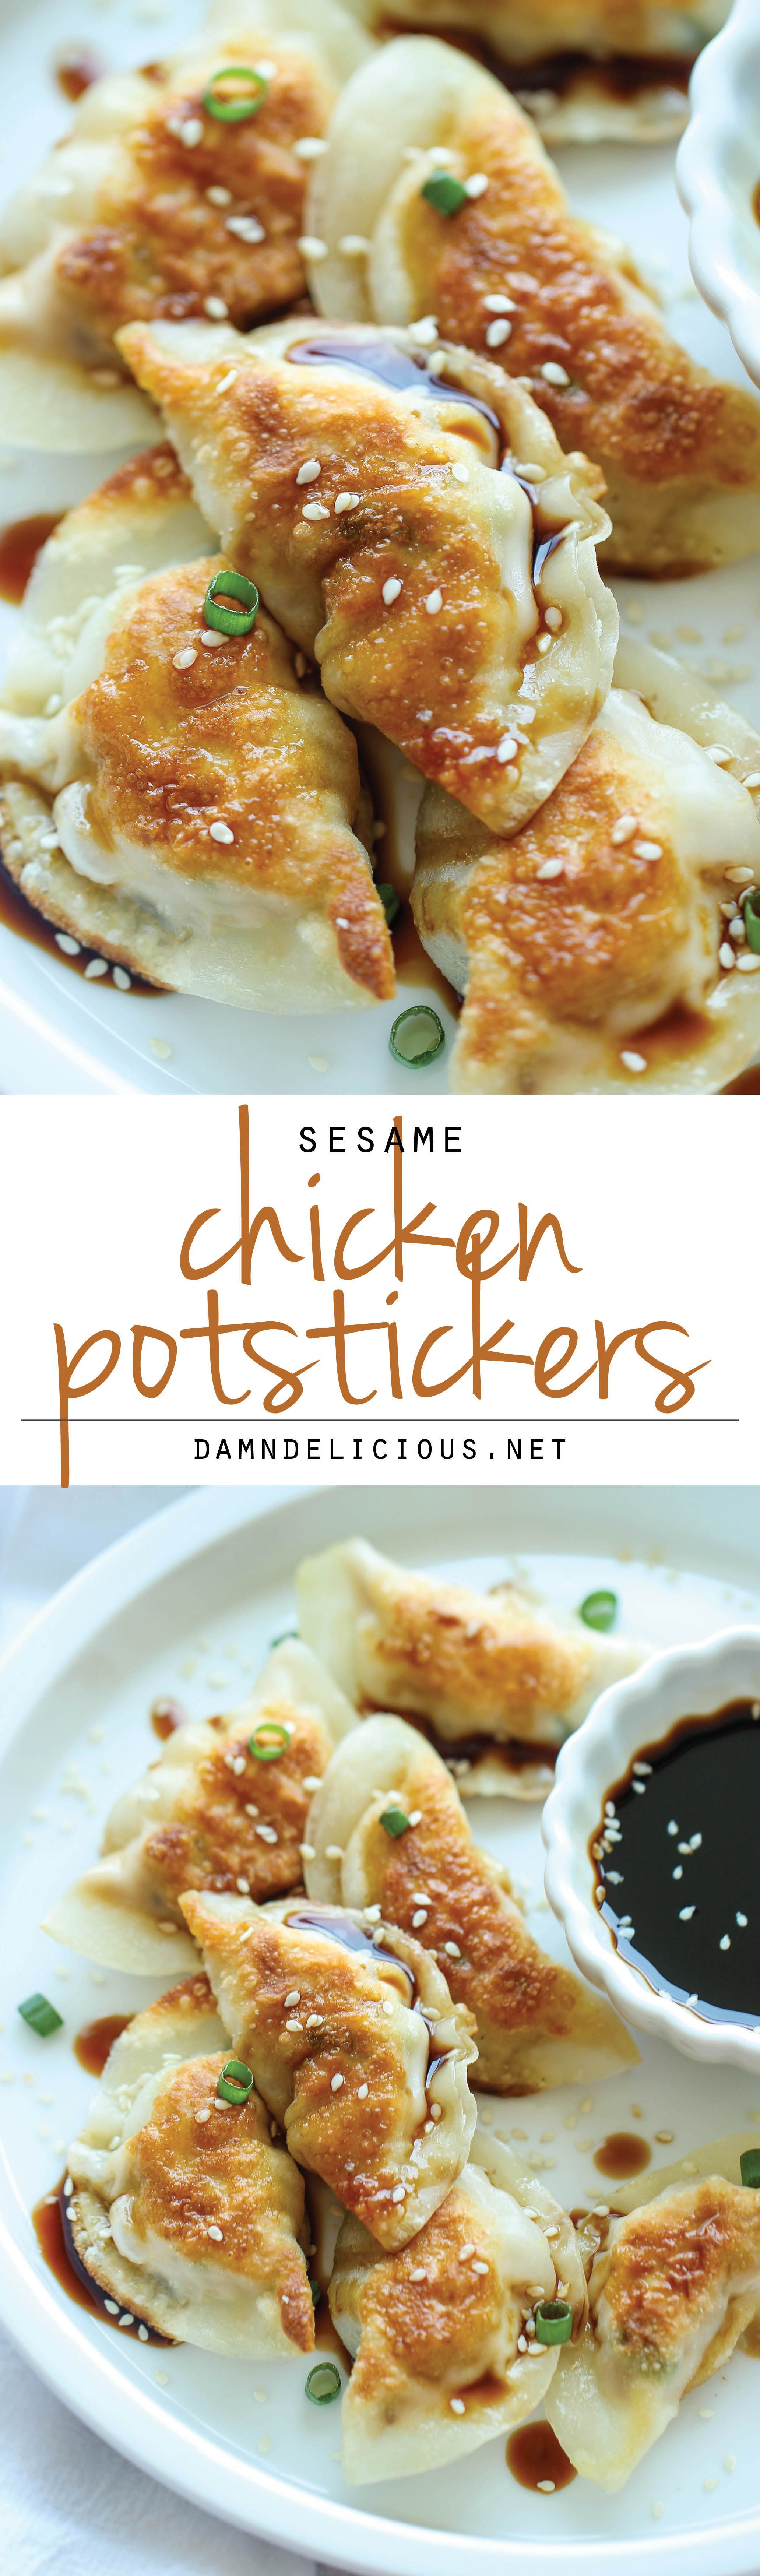 Sesame Chicken Potstickers – These are unbelievably easy to make. And theyre freezer-friendly too, perfect for those busy